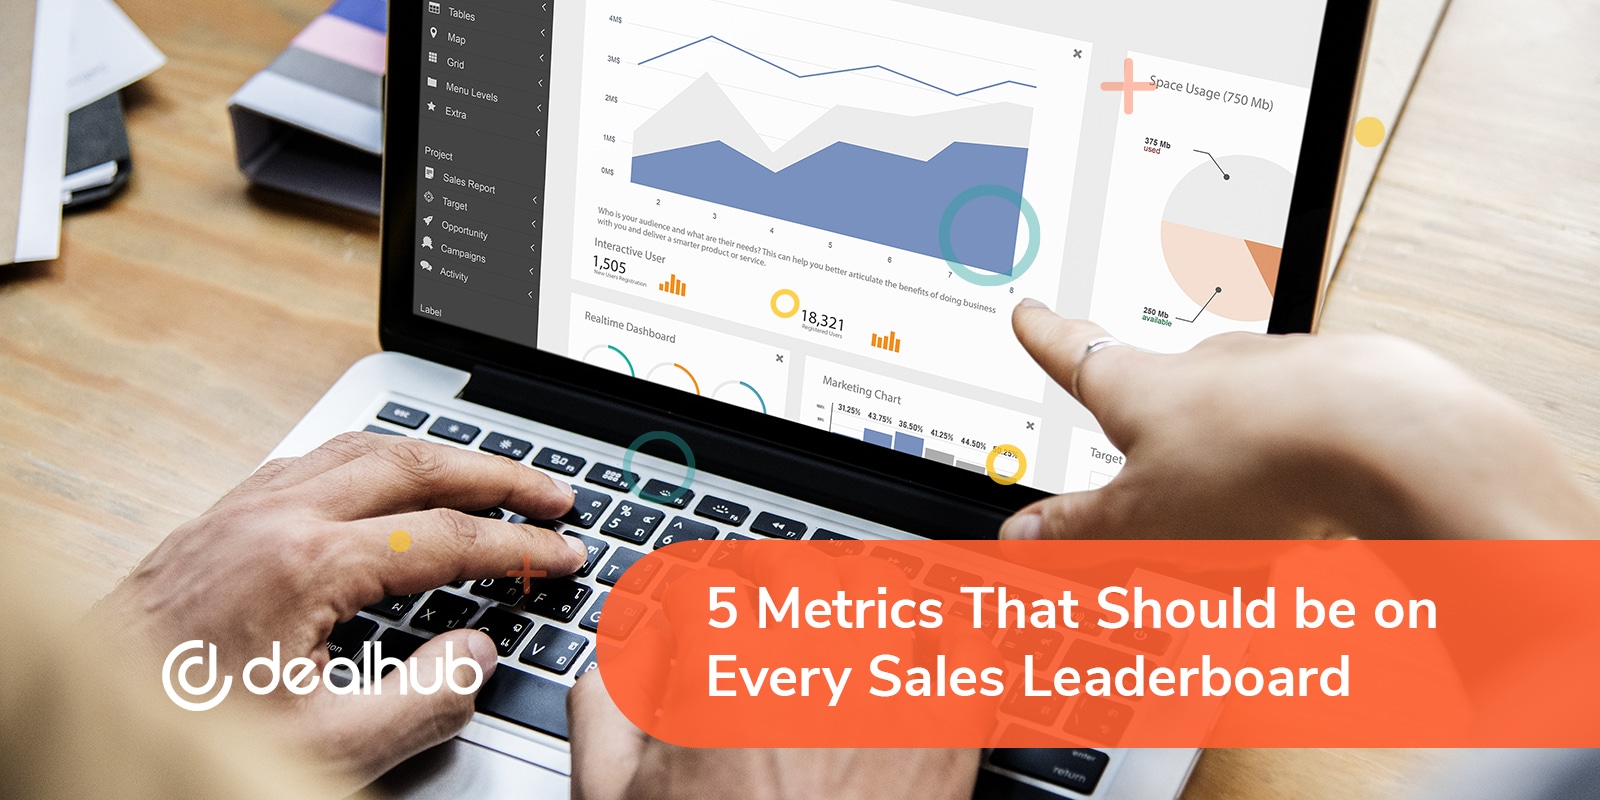 5 Metrics That Should be on Every Sales Leaderboard